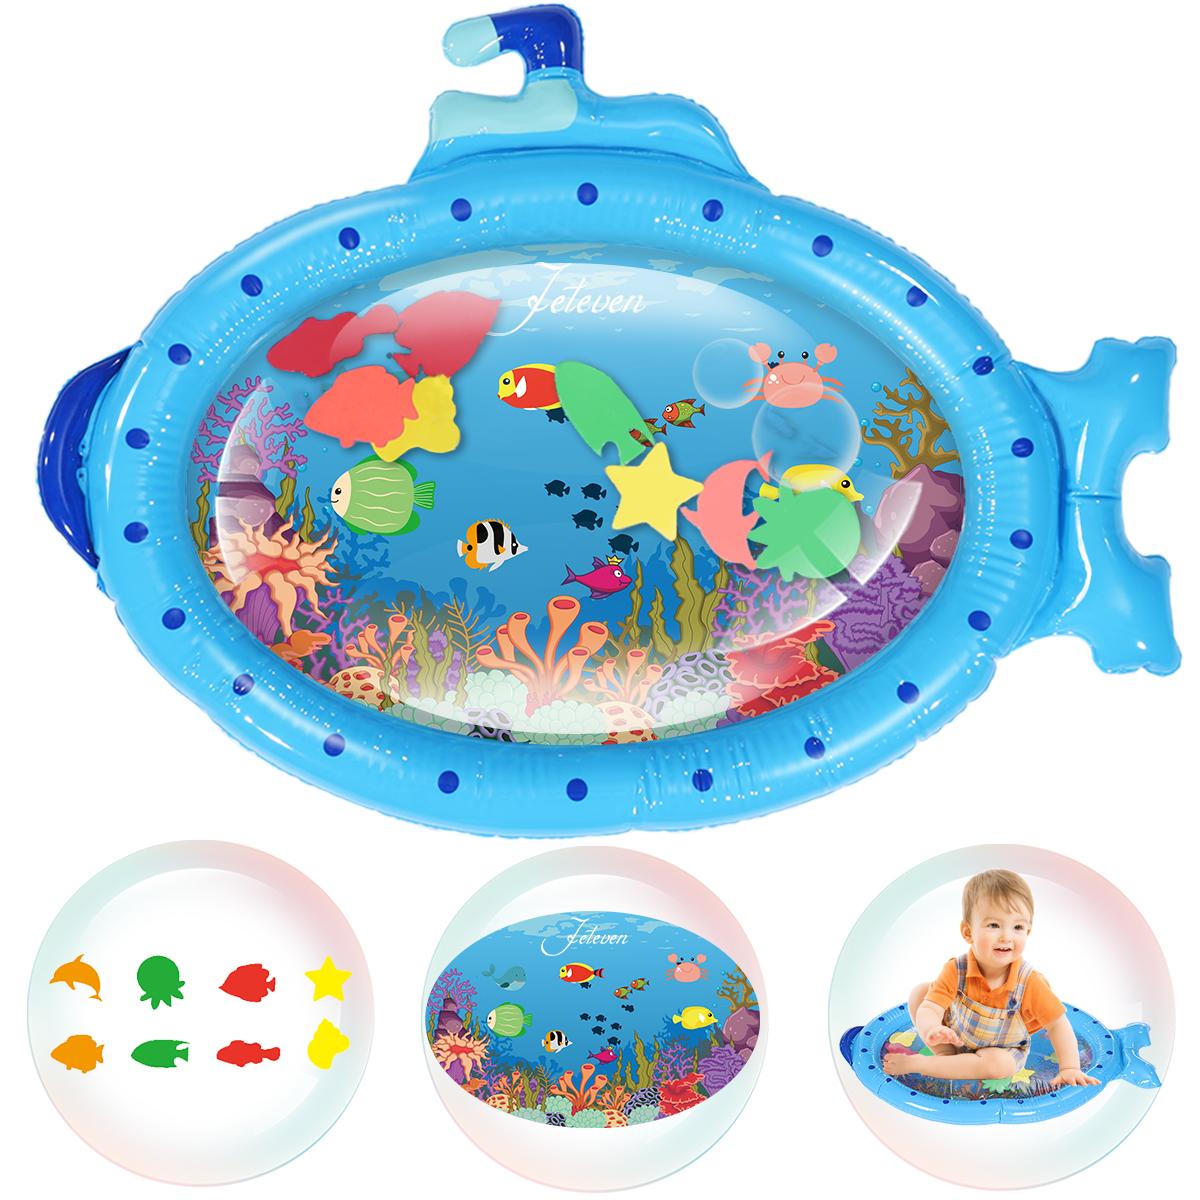 Blue-Sprinkler-Play-Mat-With-Cartoon-Submarine-Pattern-For-Kids-Filling-Fun-Water-Cushion-Baby-Toys--1895673-9